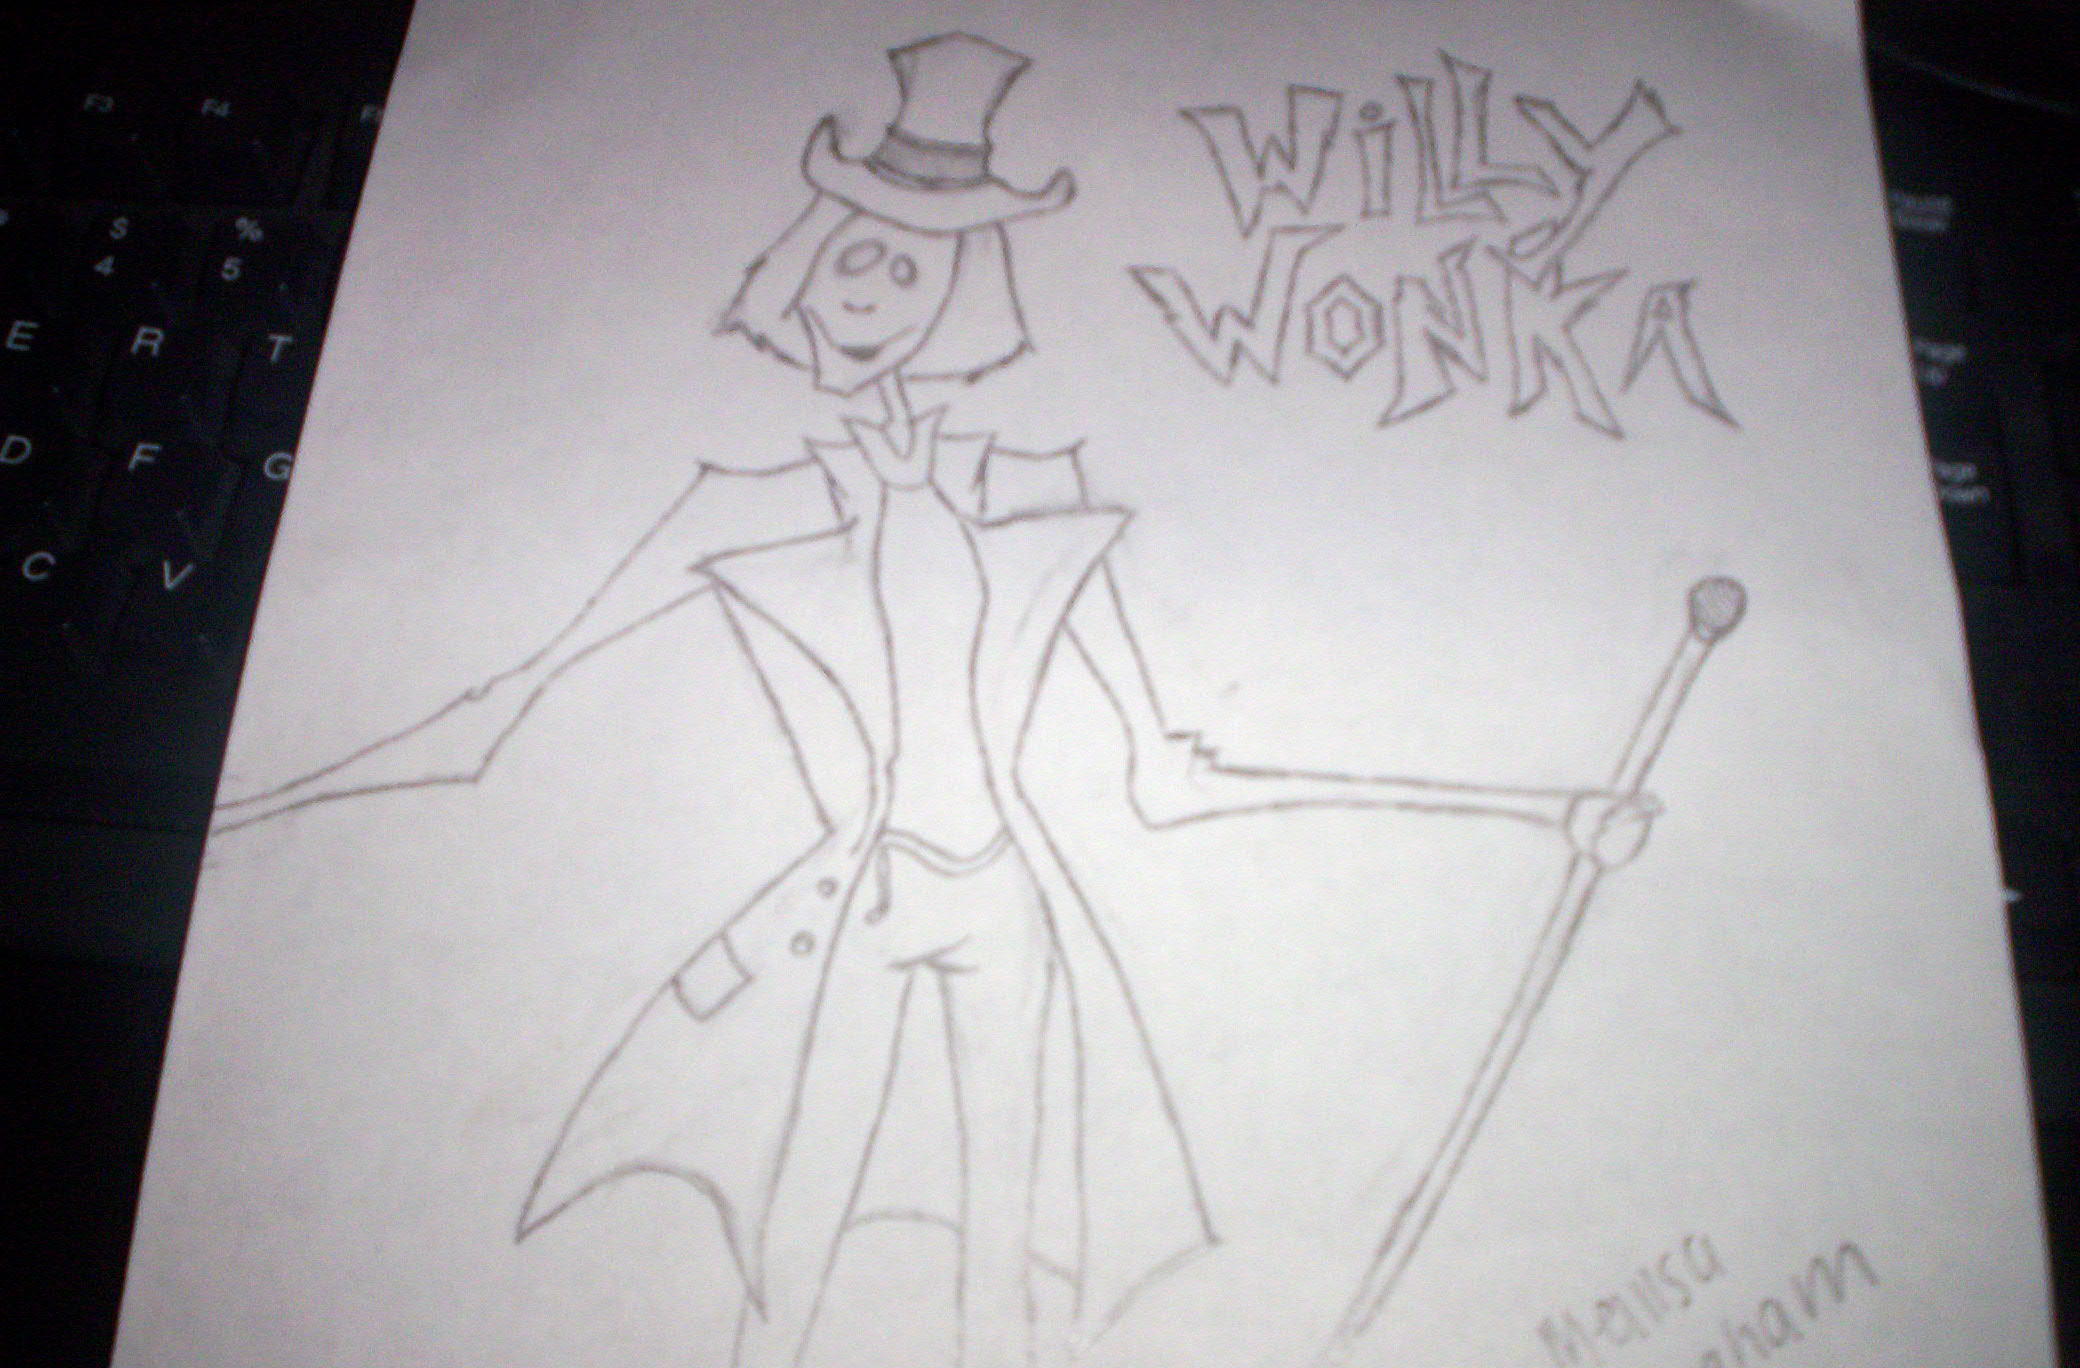 johnny depp as willy wonka by mellisagraham